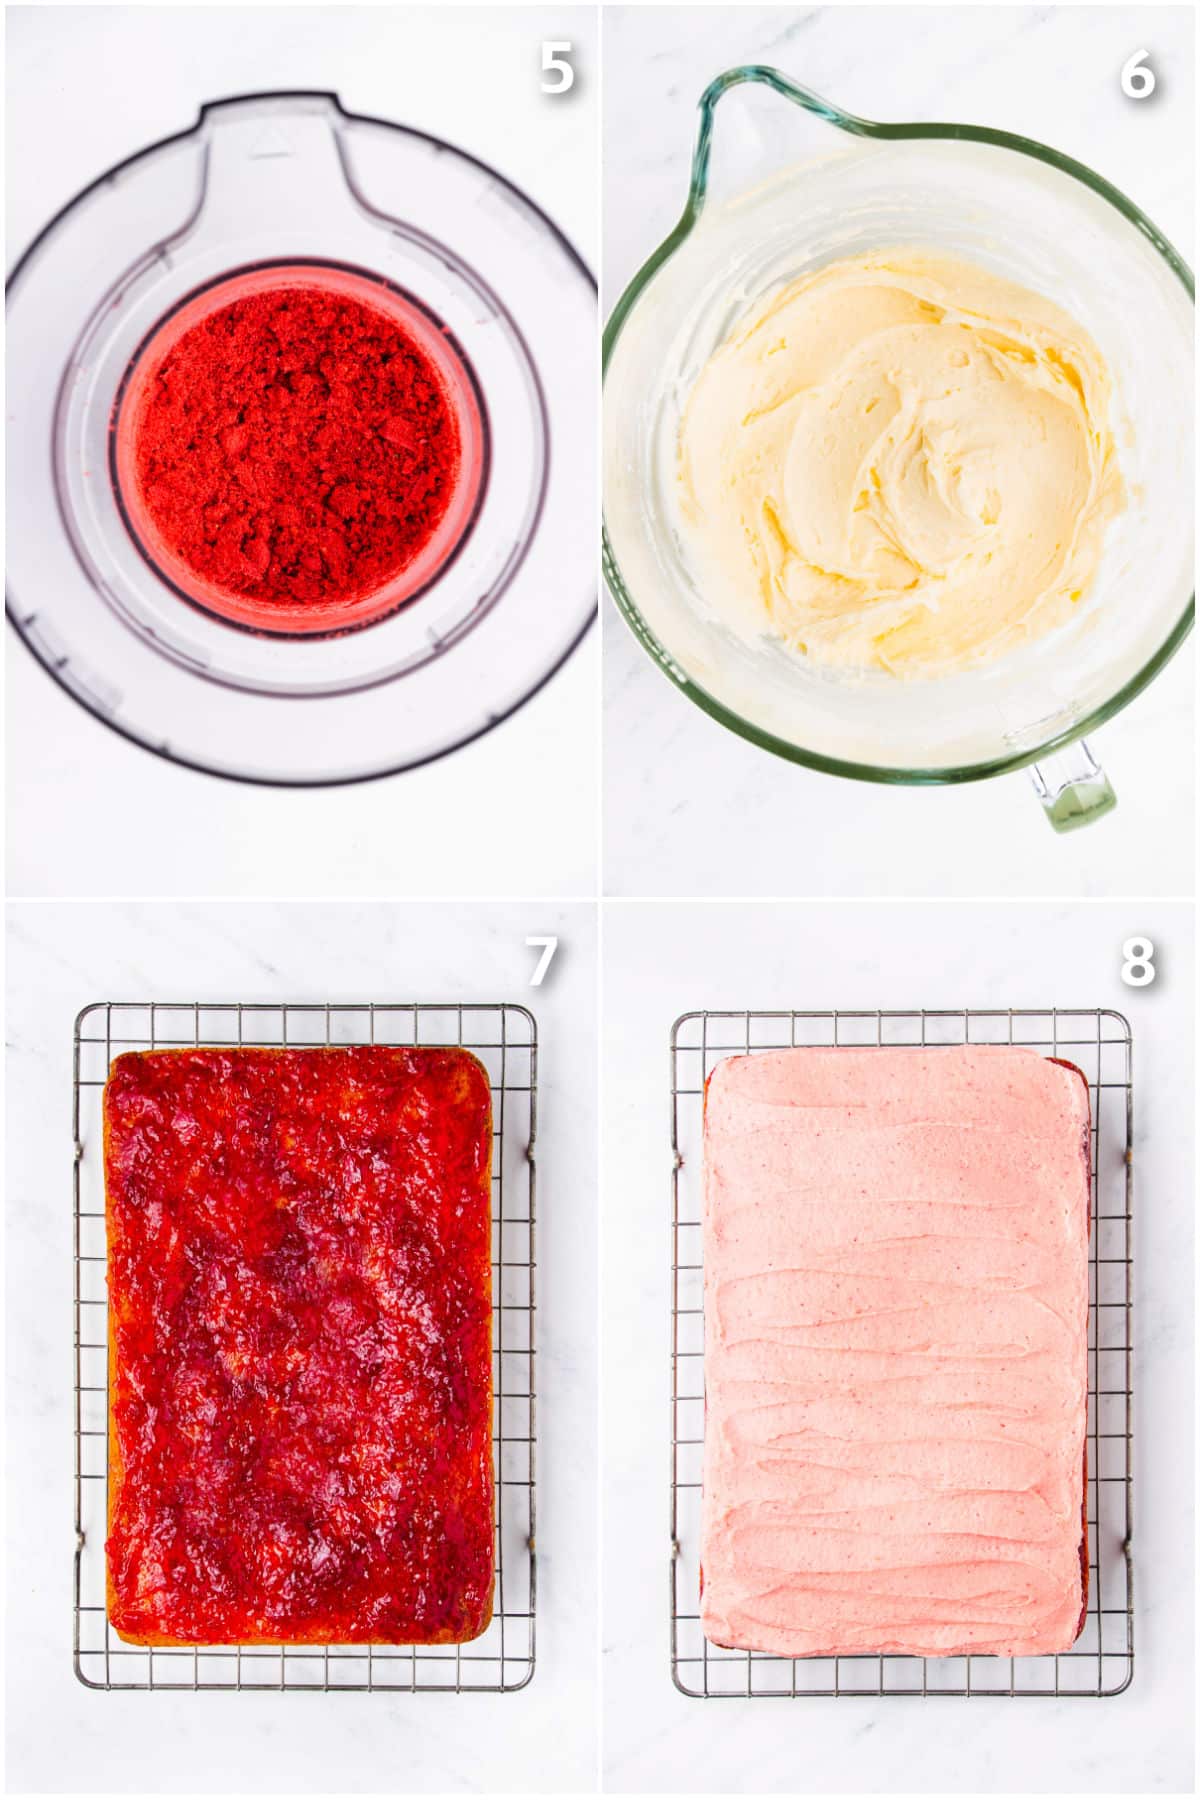 Strawberry buttercream being made and layered onto a cake with strawberry jam.